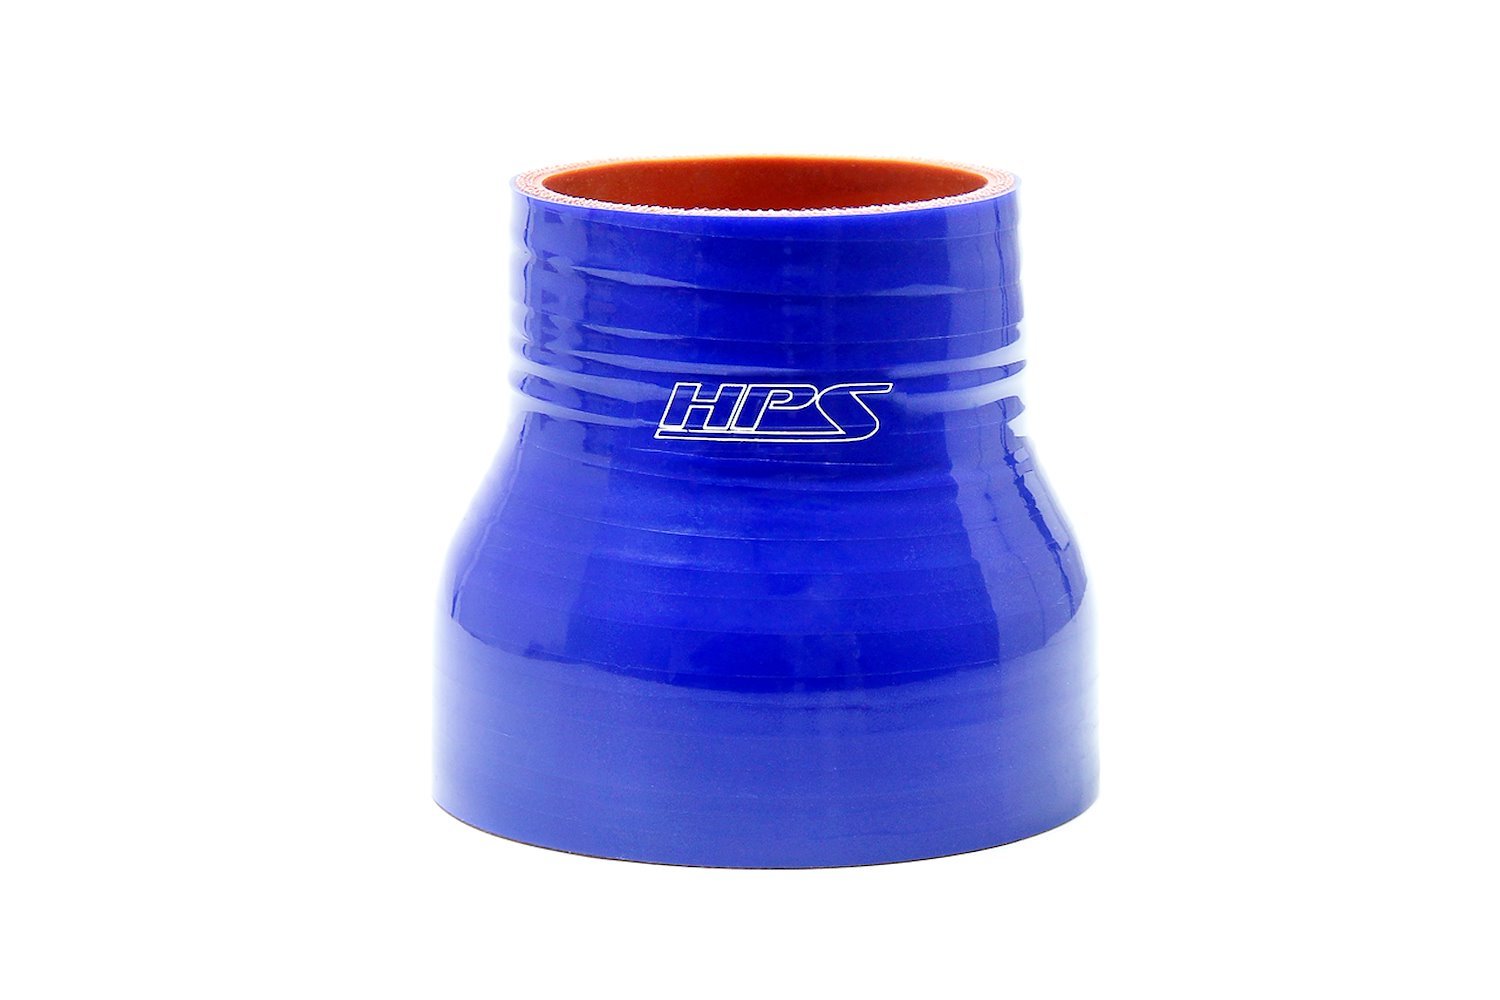 HTSR-175-187-BLUE Silicone Reducer Hose, High-Temp 4-Ply Reinforced, 1-3/4 in. - 1-7/8 in. ID, 3 in. Long, Blue